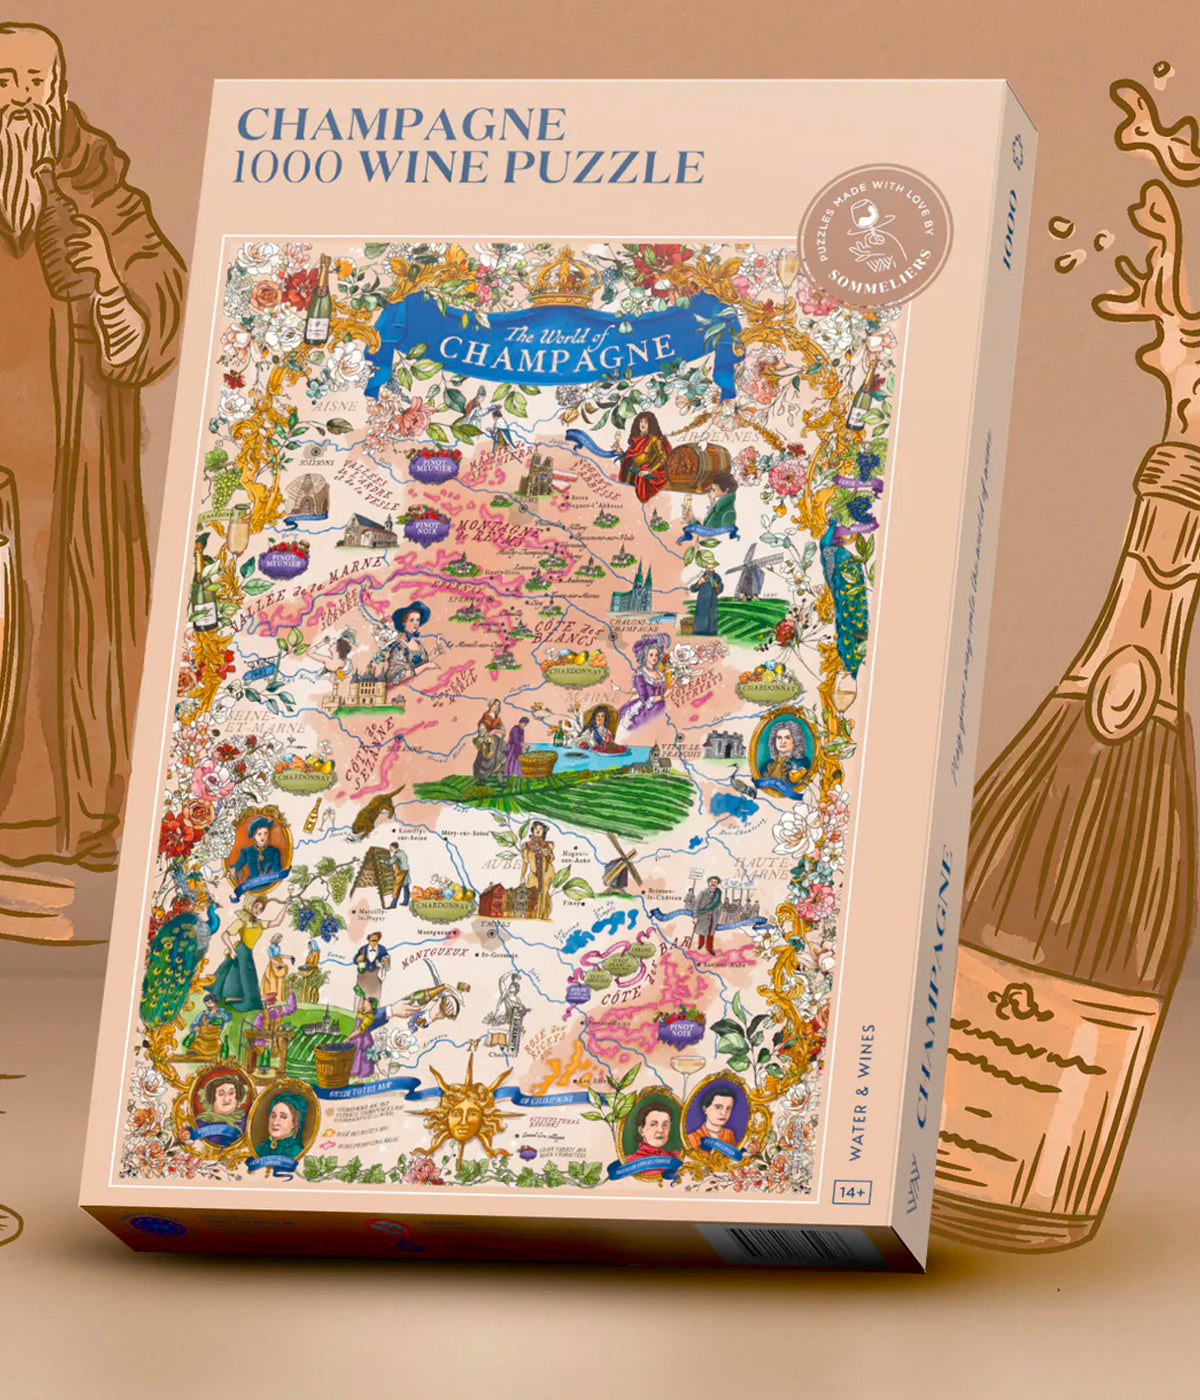 1000 Piece Puzzle of Champagne